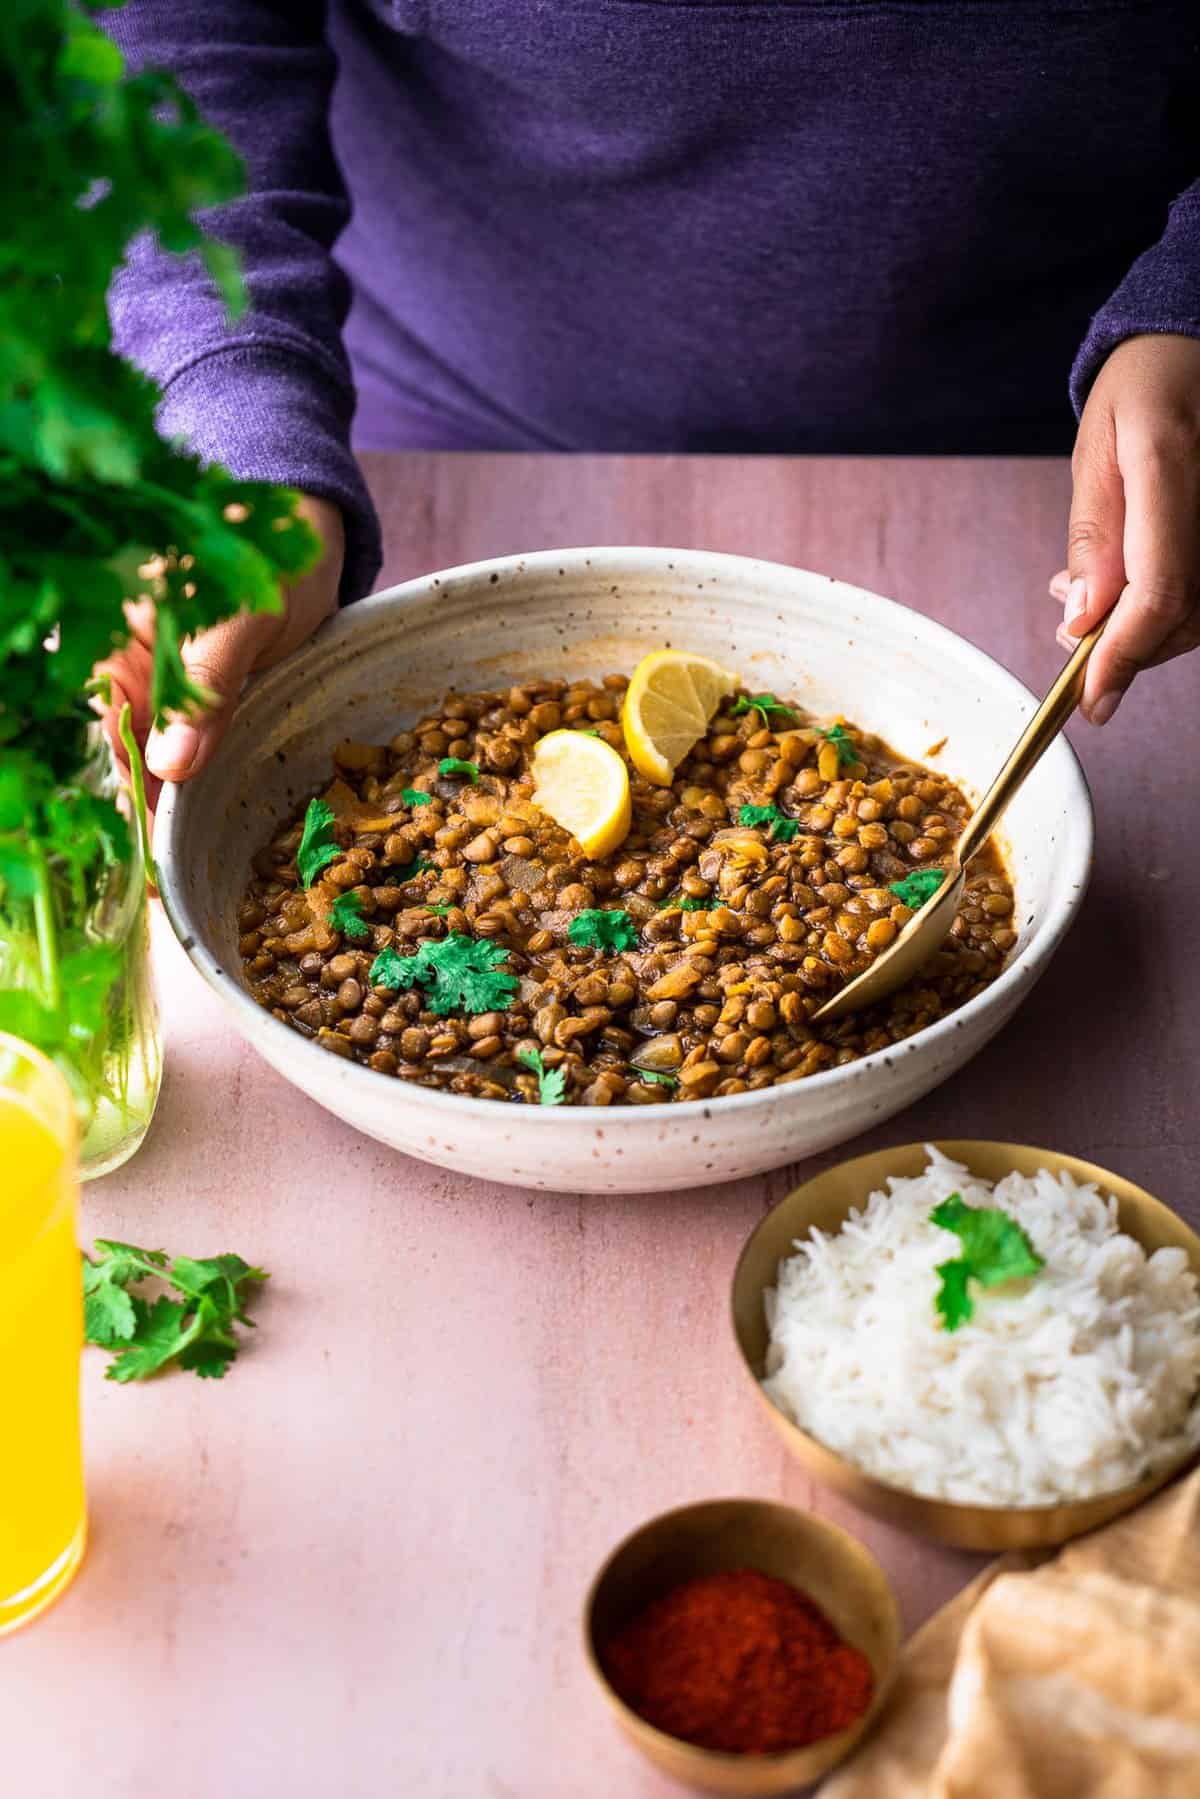 A front angled shot of a person spooning from a bowl of brown lentils.